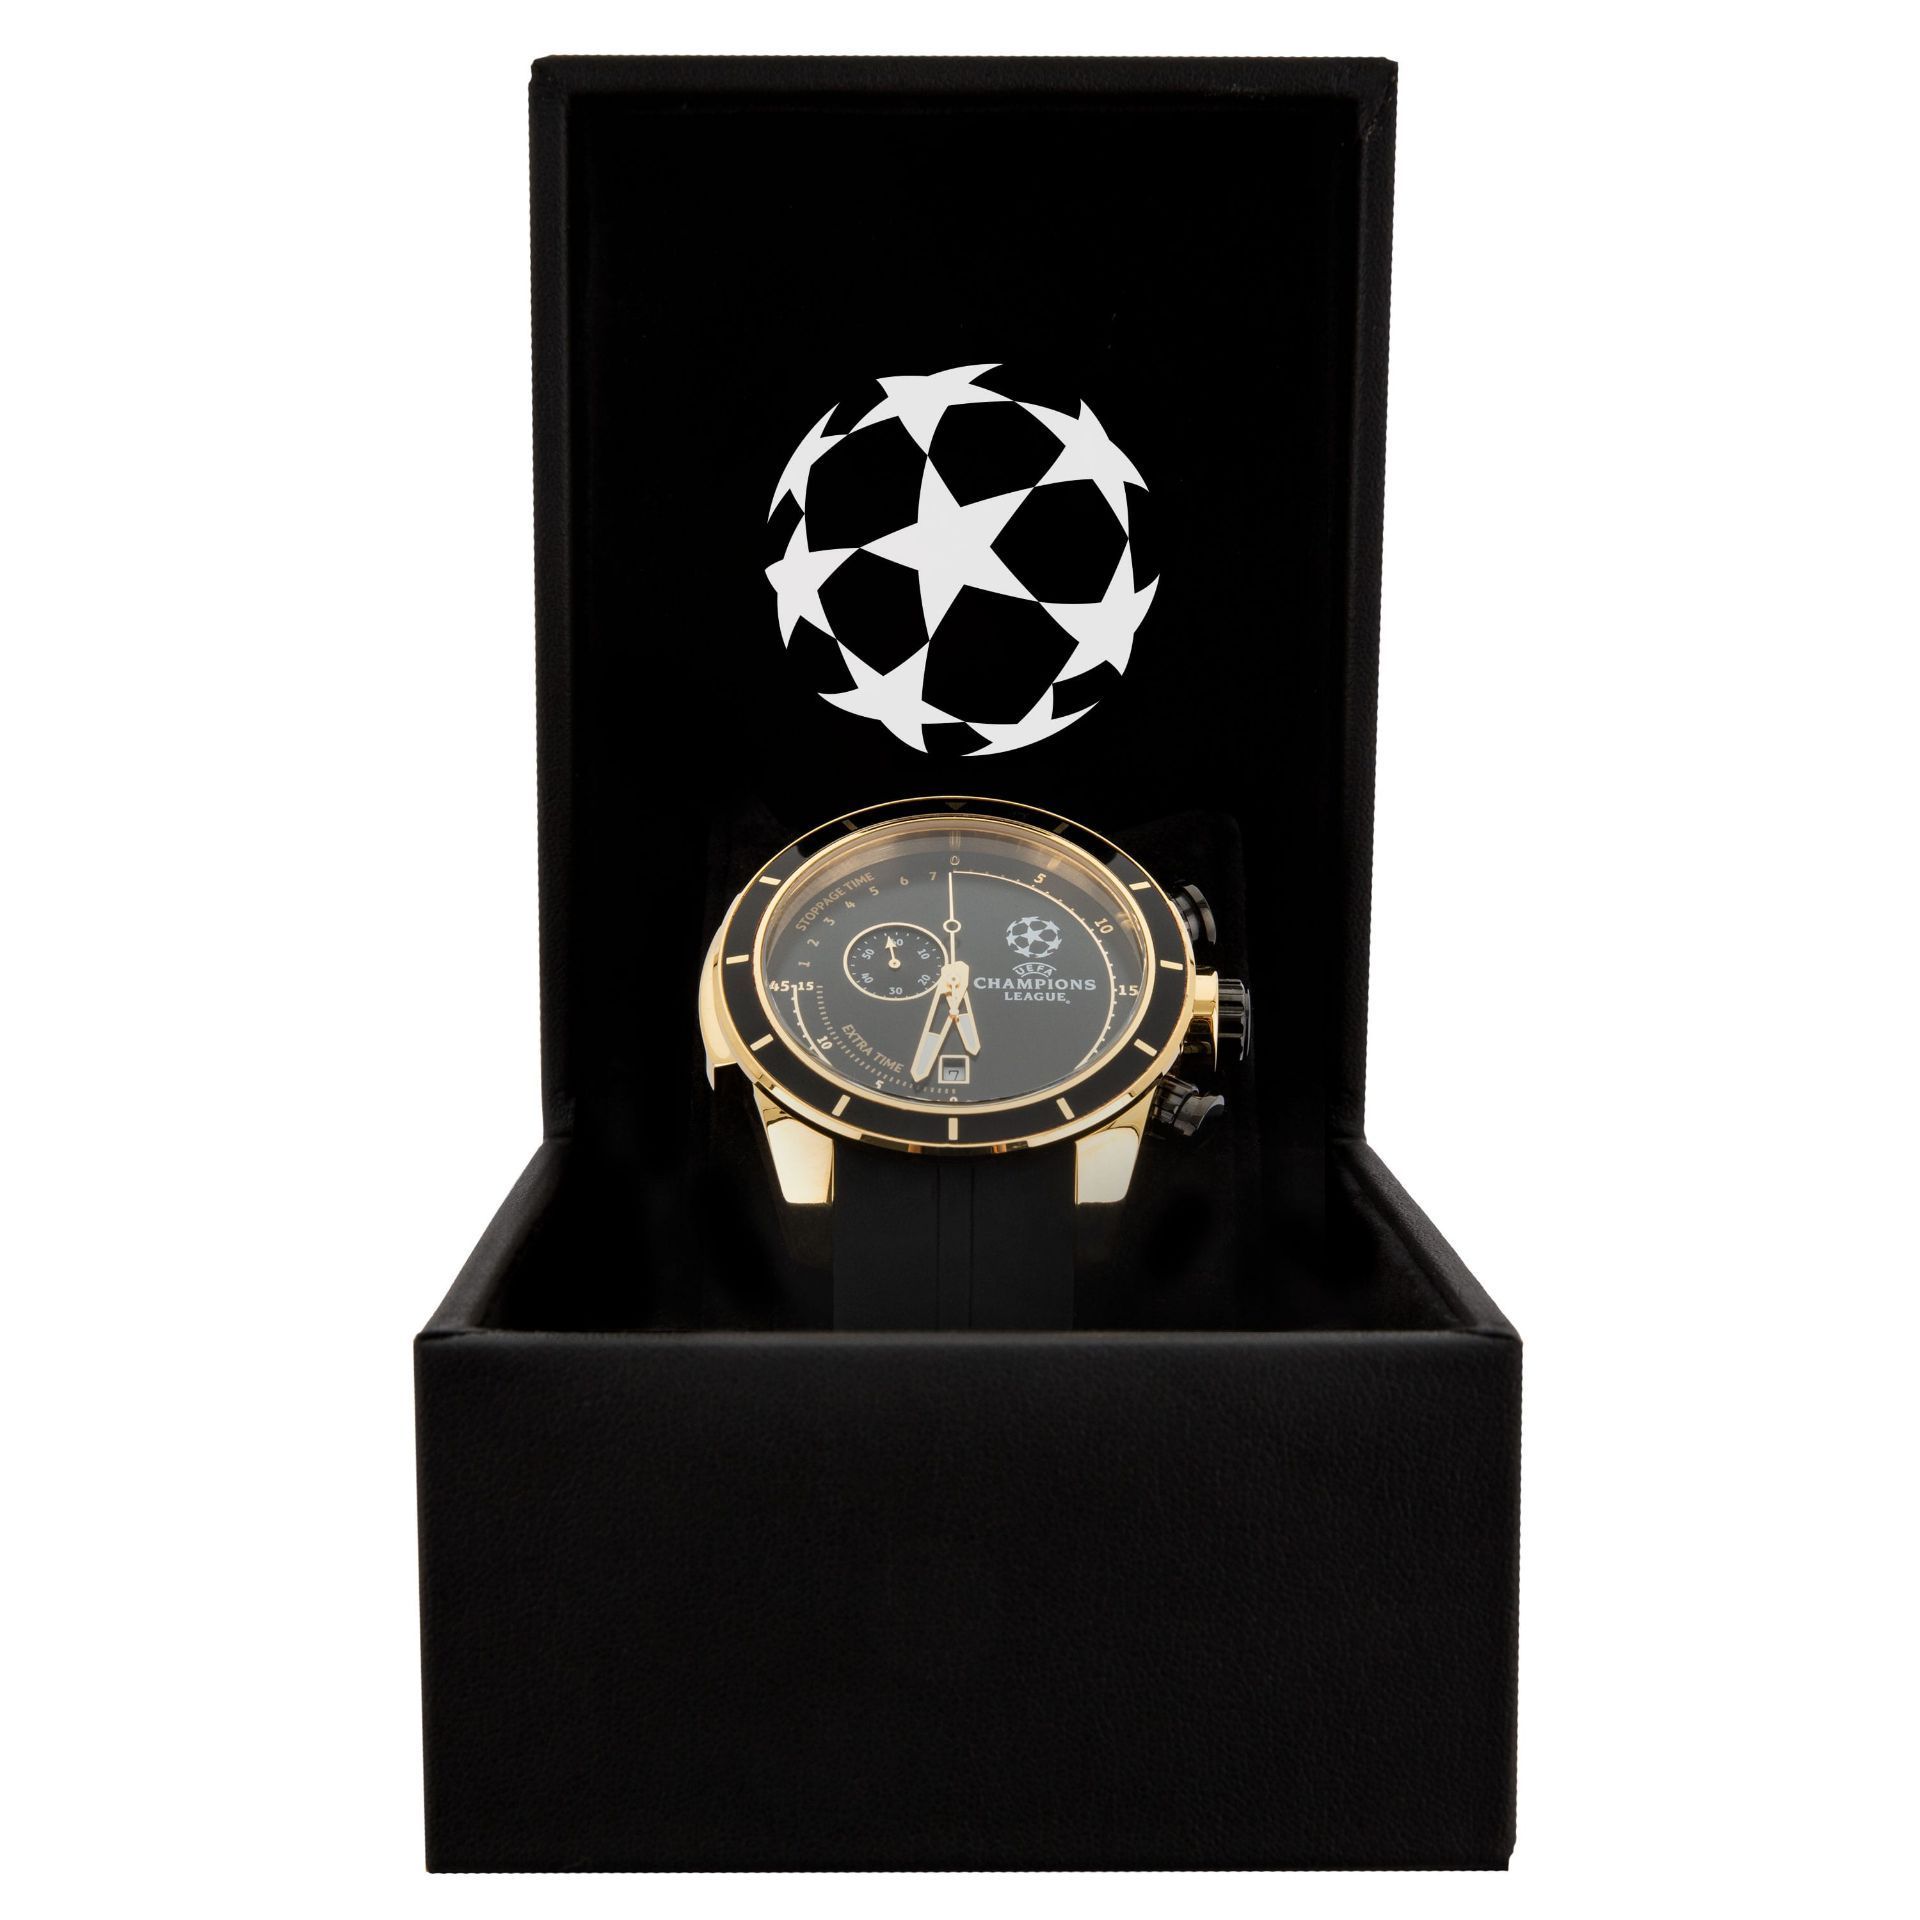 BULK LOT OF 20 x BRAND NEW OFFICIAL UEFA CHAMPIONS LEAGUE 45 MINUTE COUNTDOWN WATCH CL45-GLDW-BLWHP - Image 4 of 5